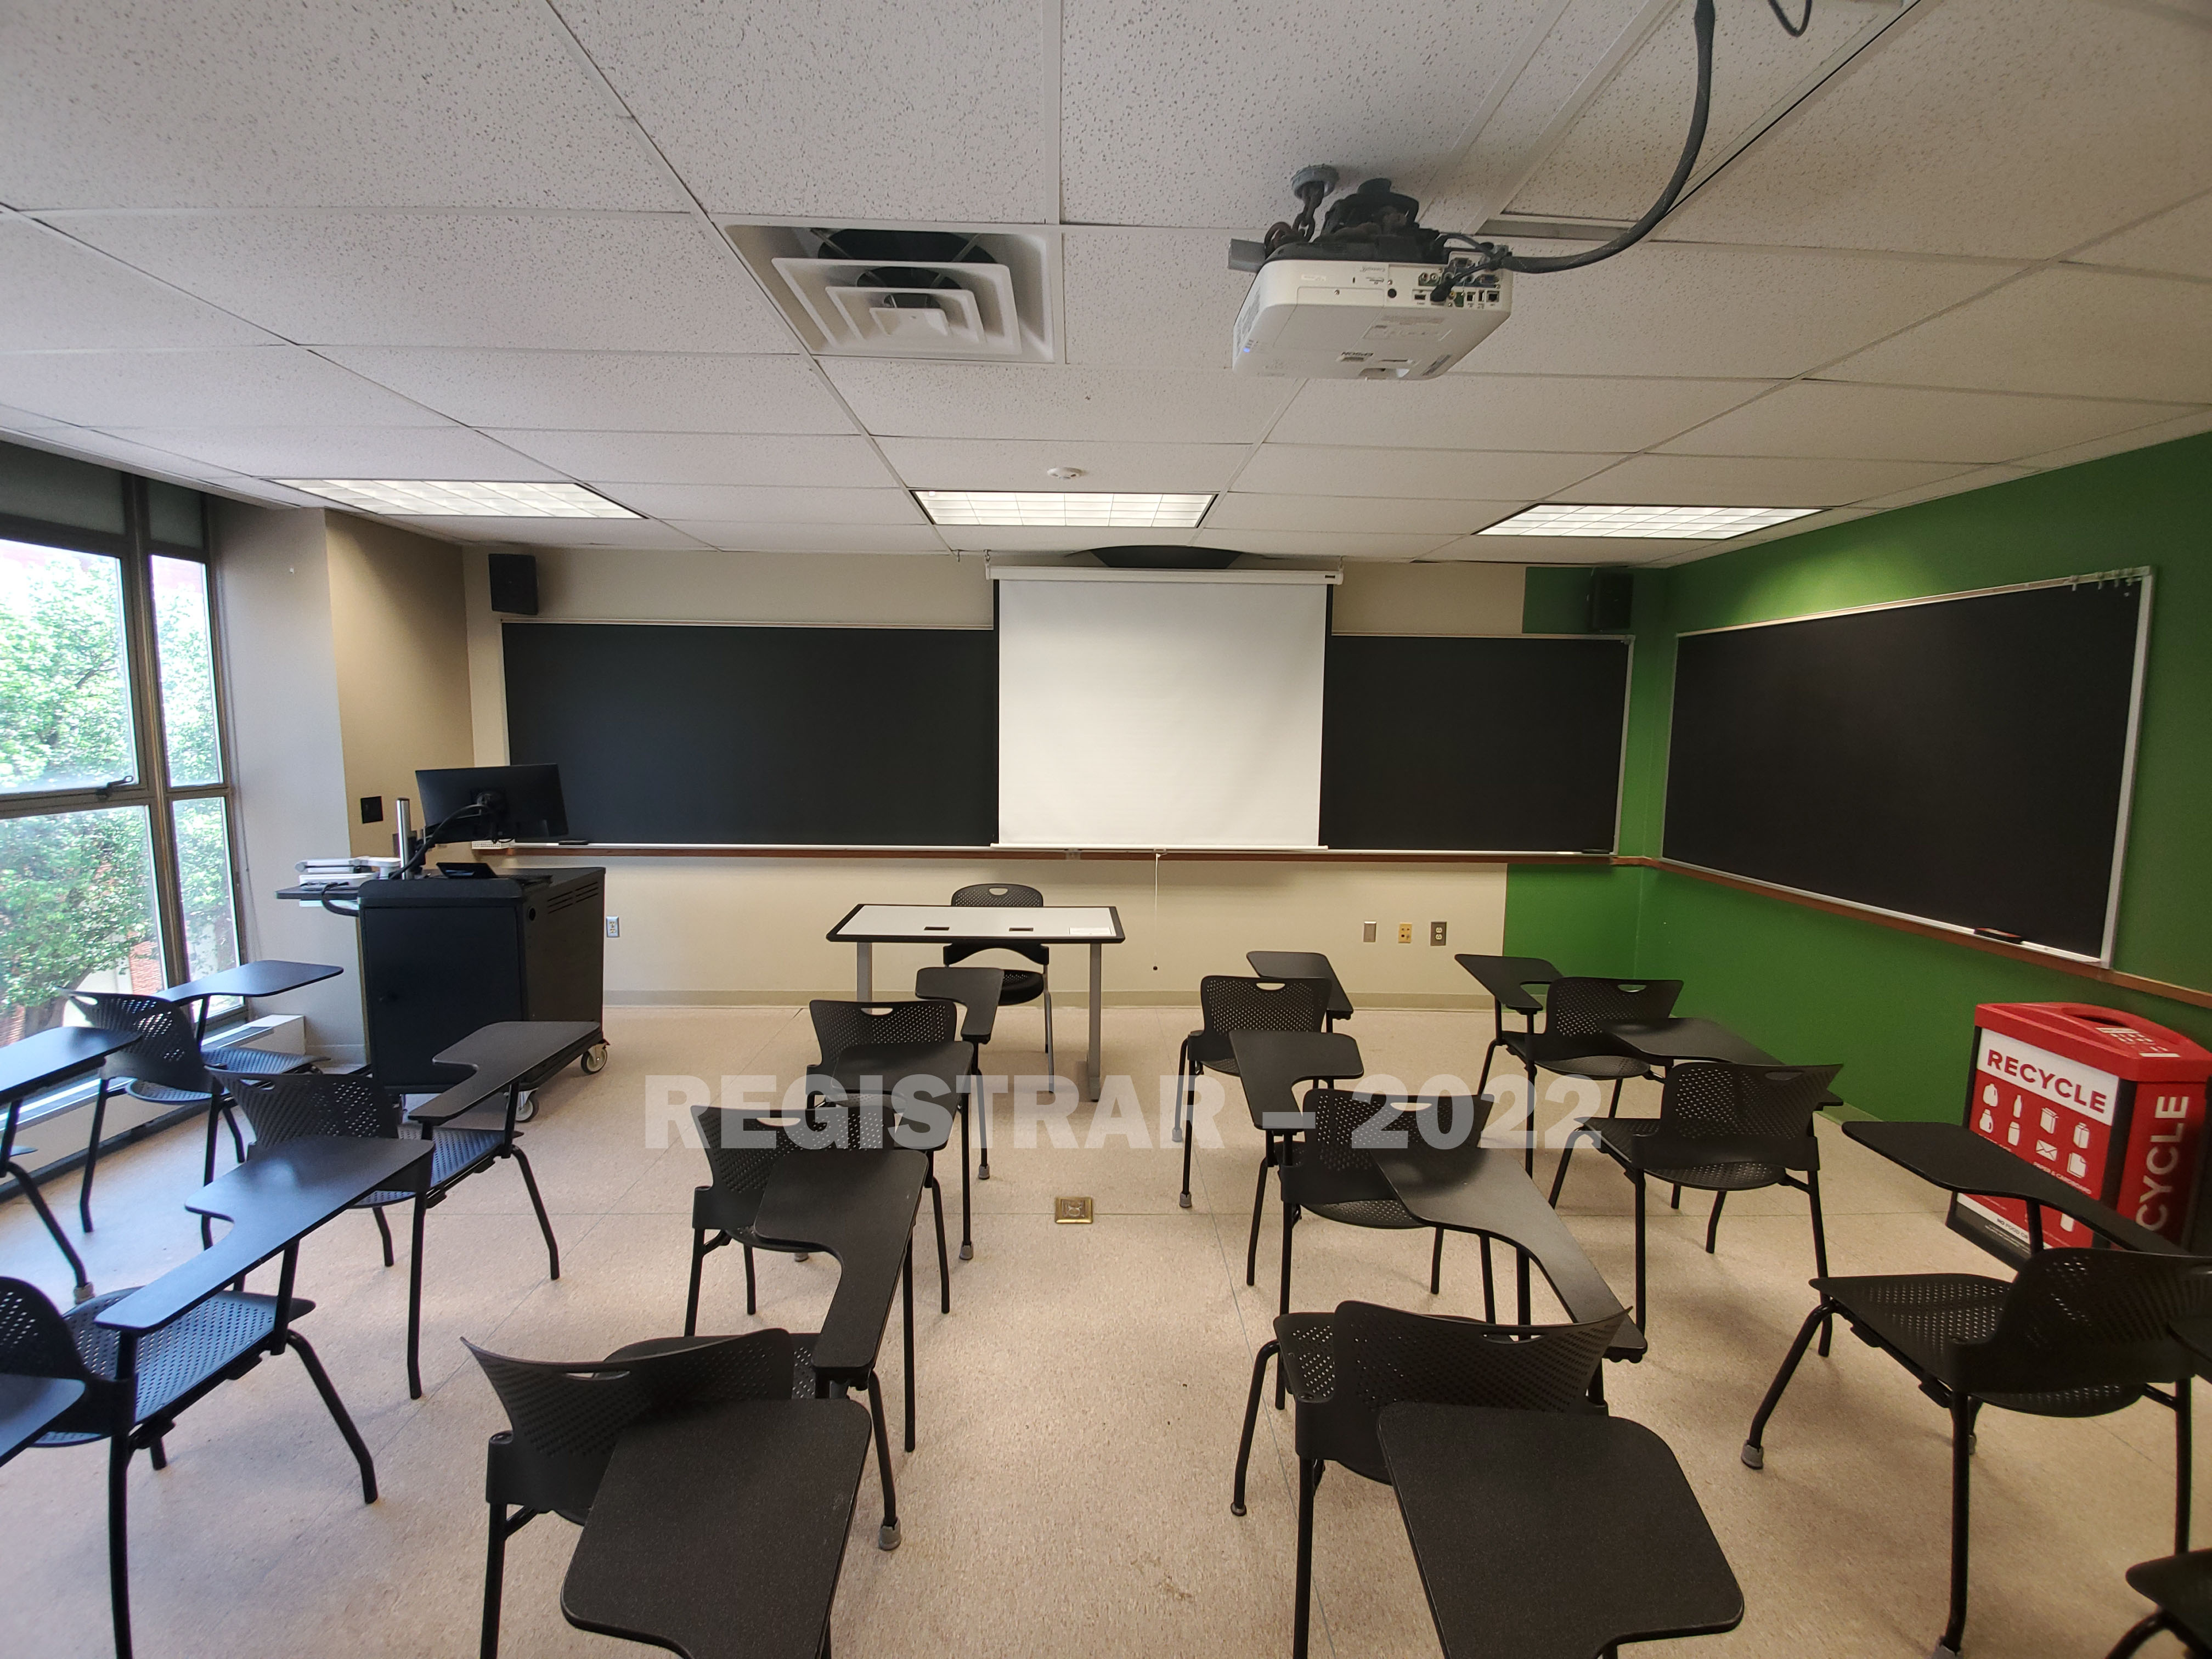 Enarson Classroom Building room 304 ultra wide angle view from the back of the room with projector screen down